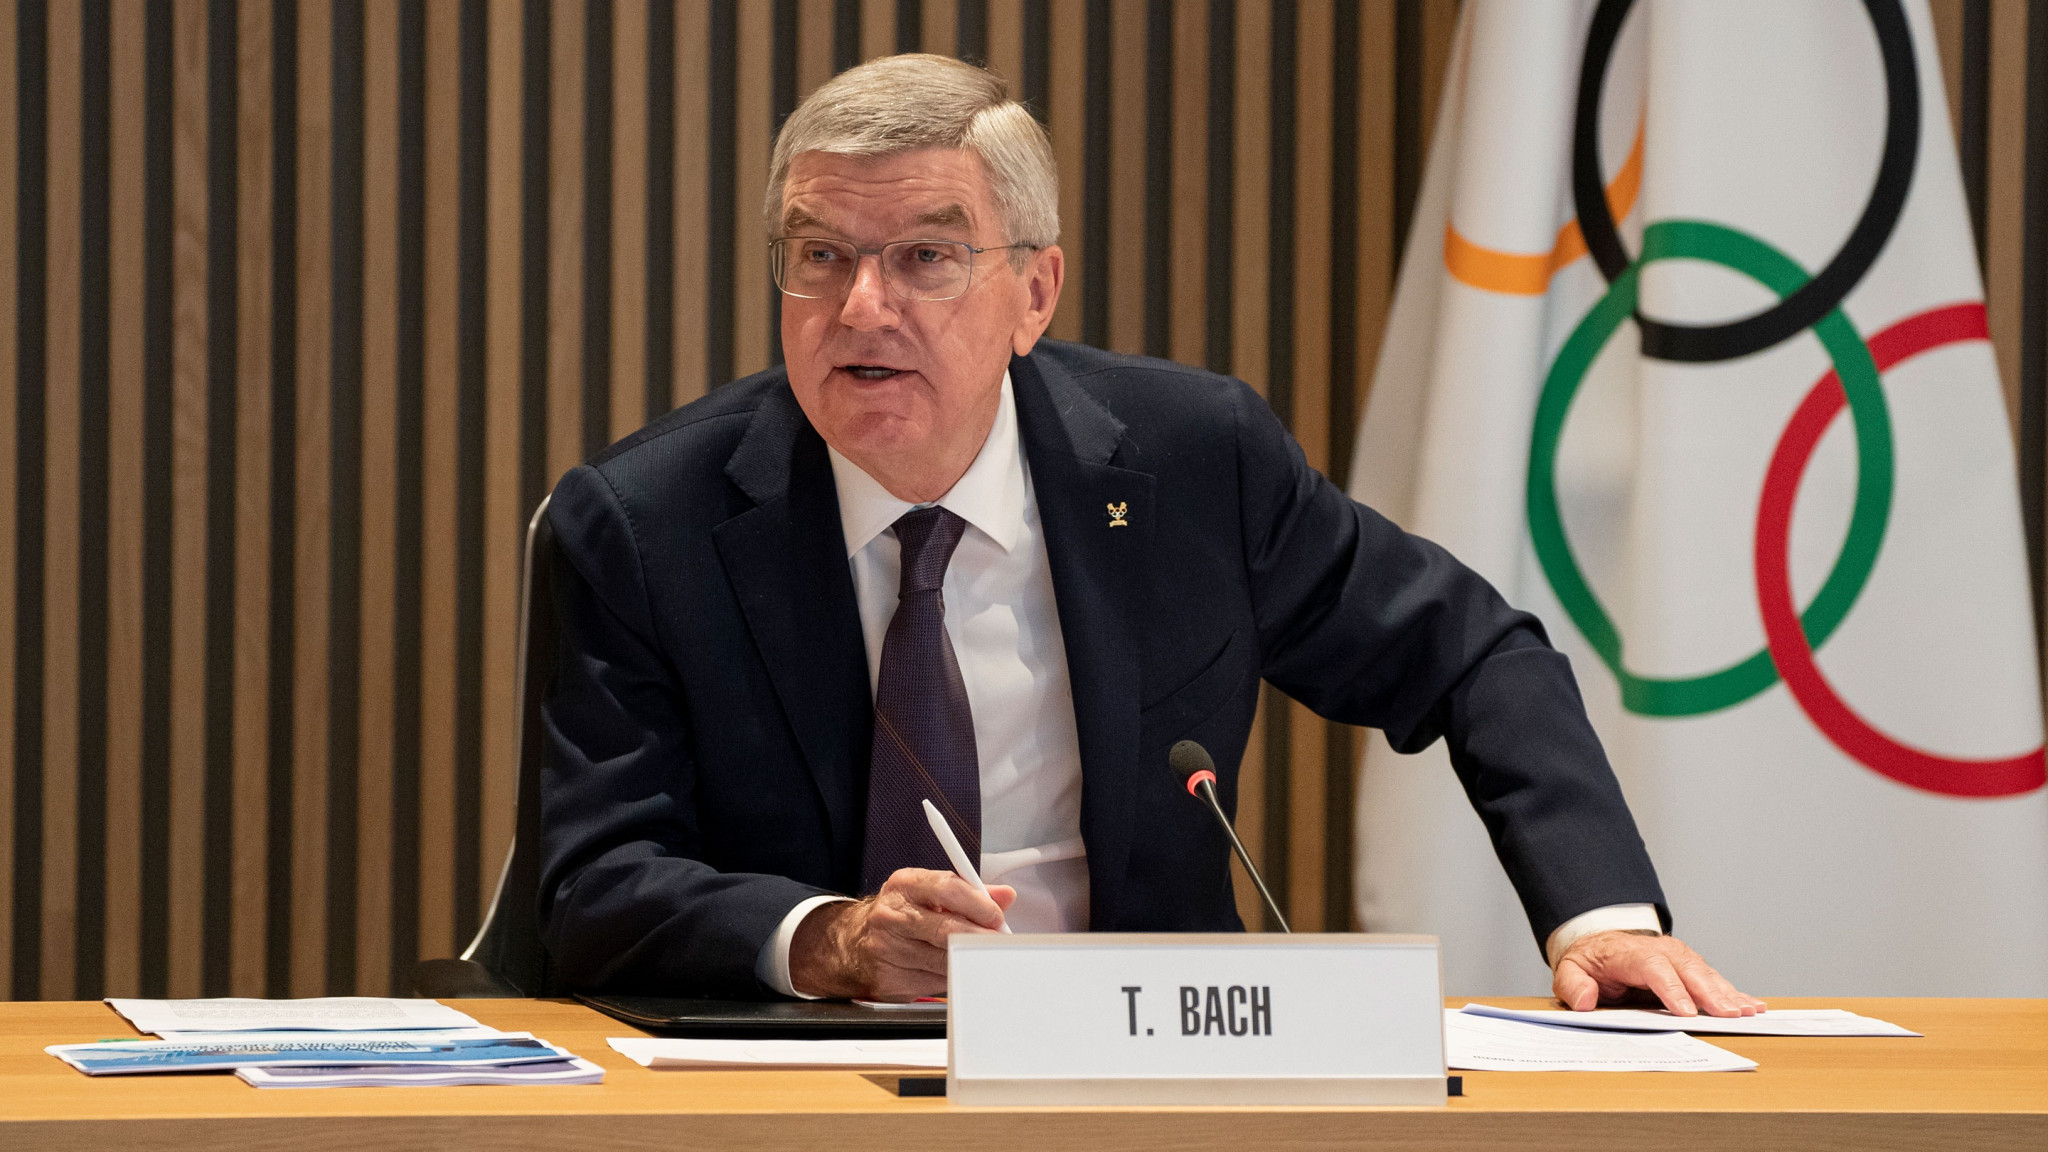 Bach claims 2022 was "as successful as it was turbulent" in New Year message